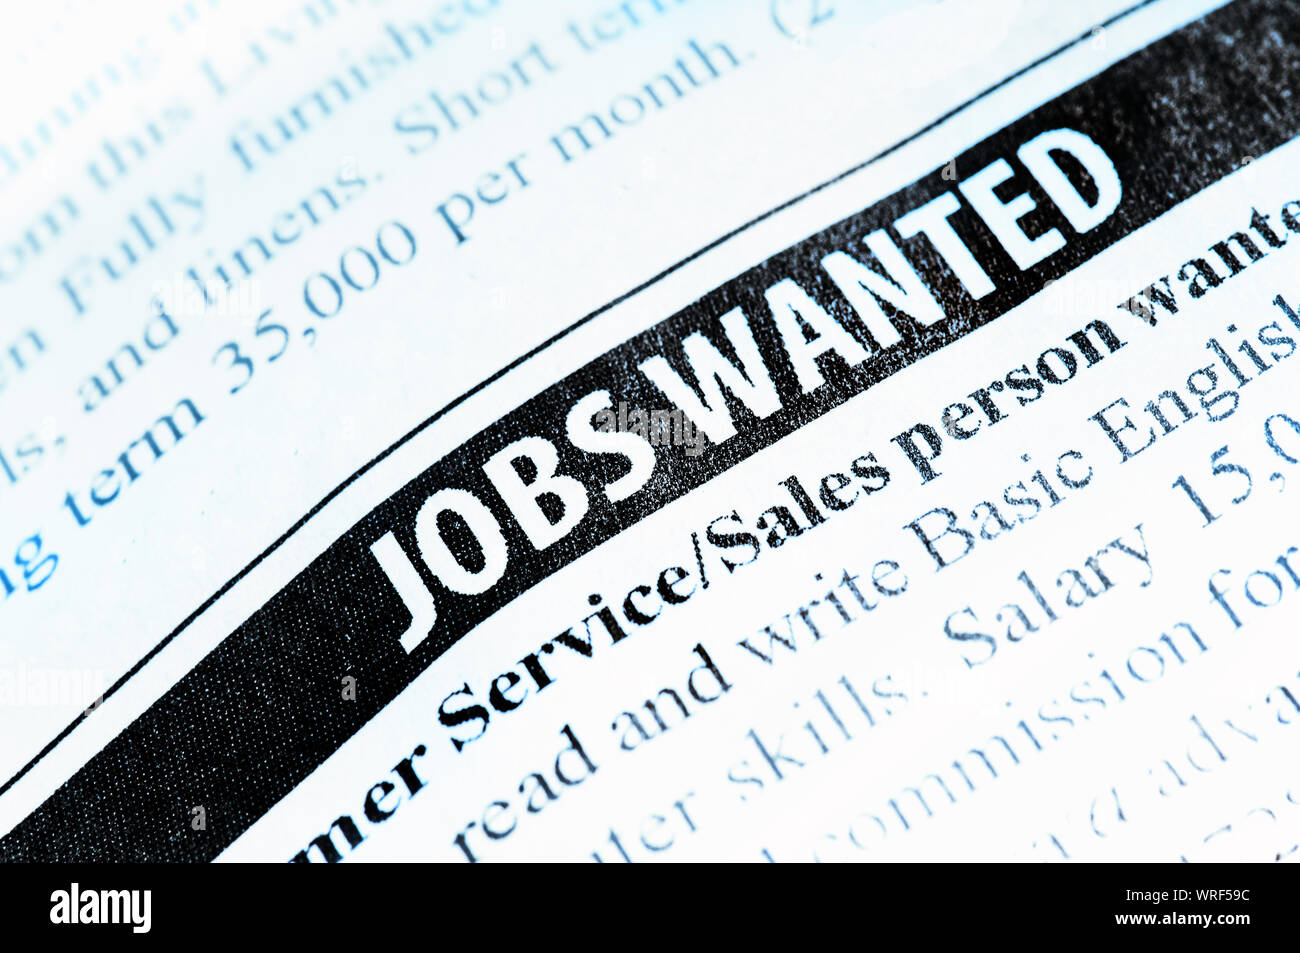 Jobs Wanted newspaper classified ad Stock Photo